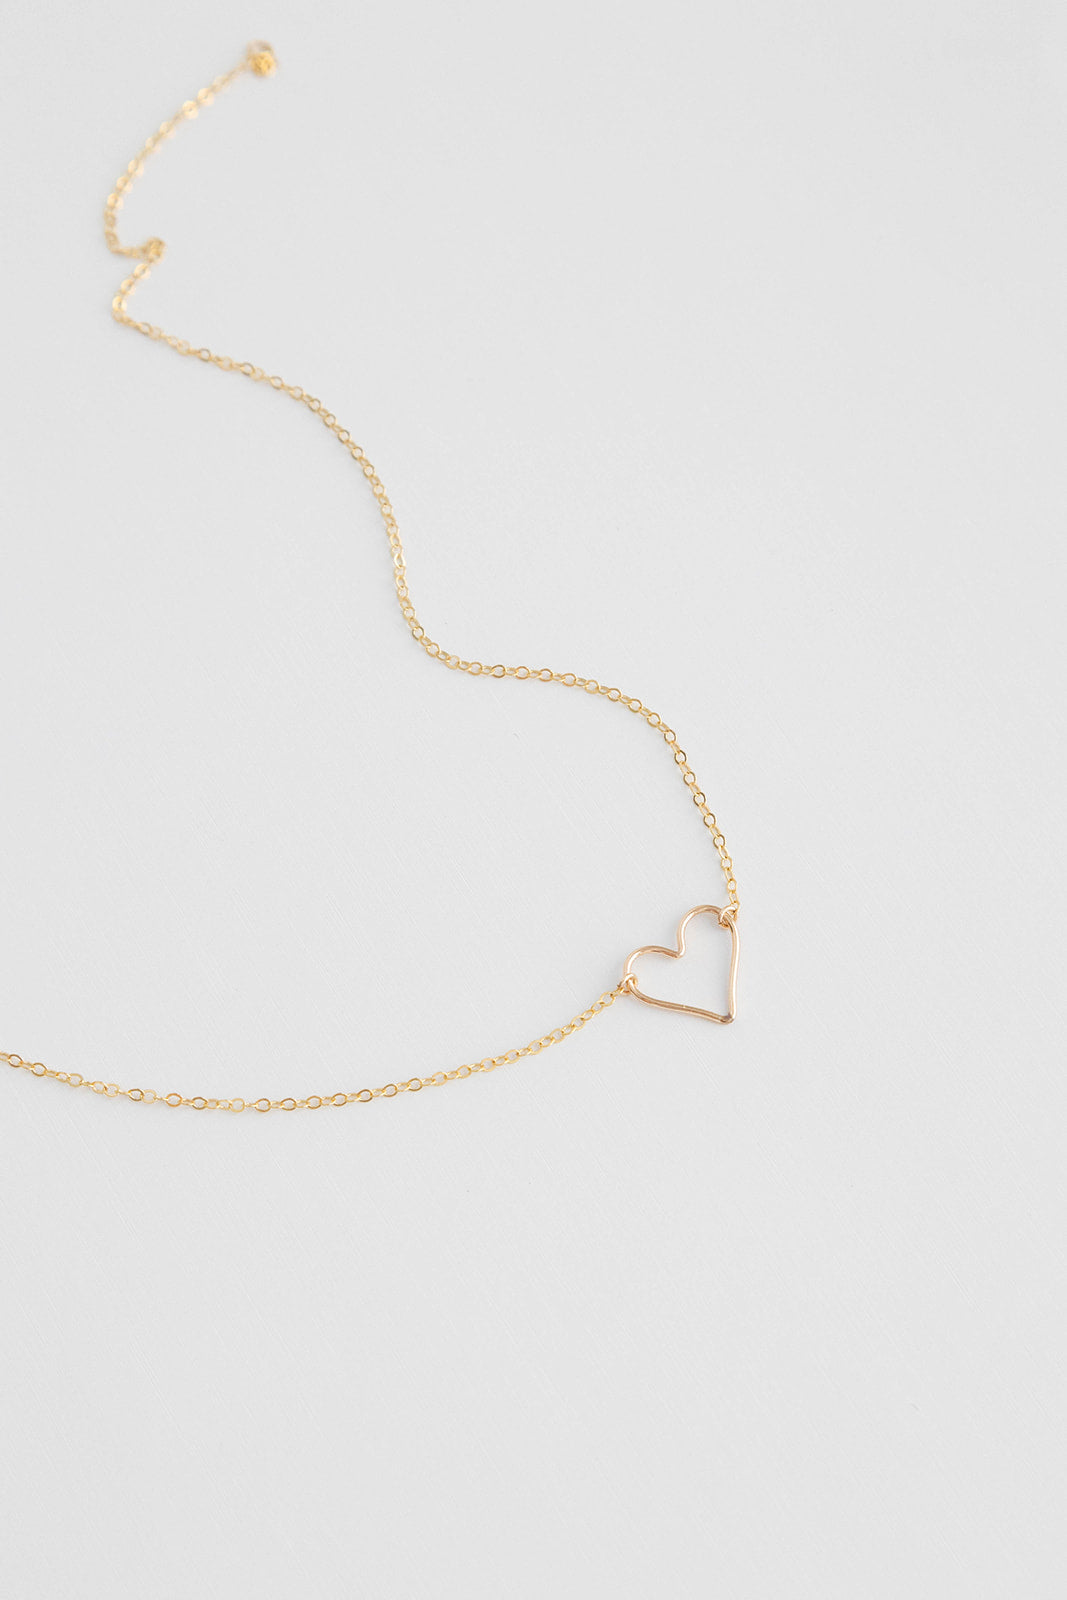 Dainty 14k gold filled floating heart necklace laying on a white background.